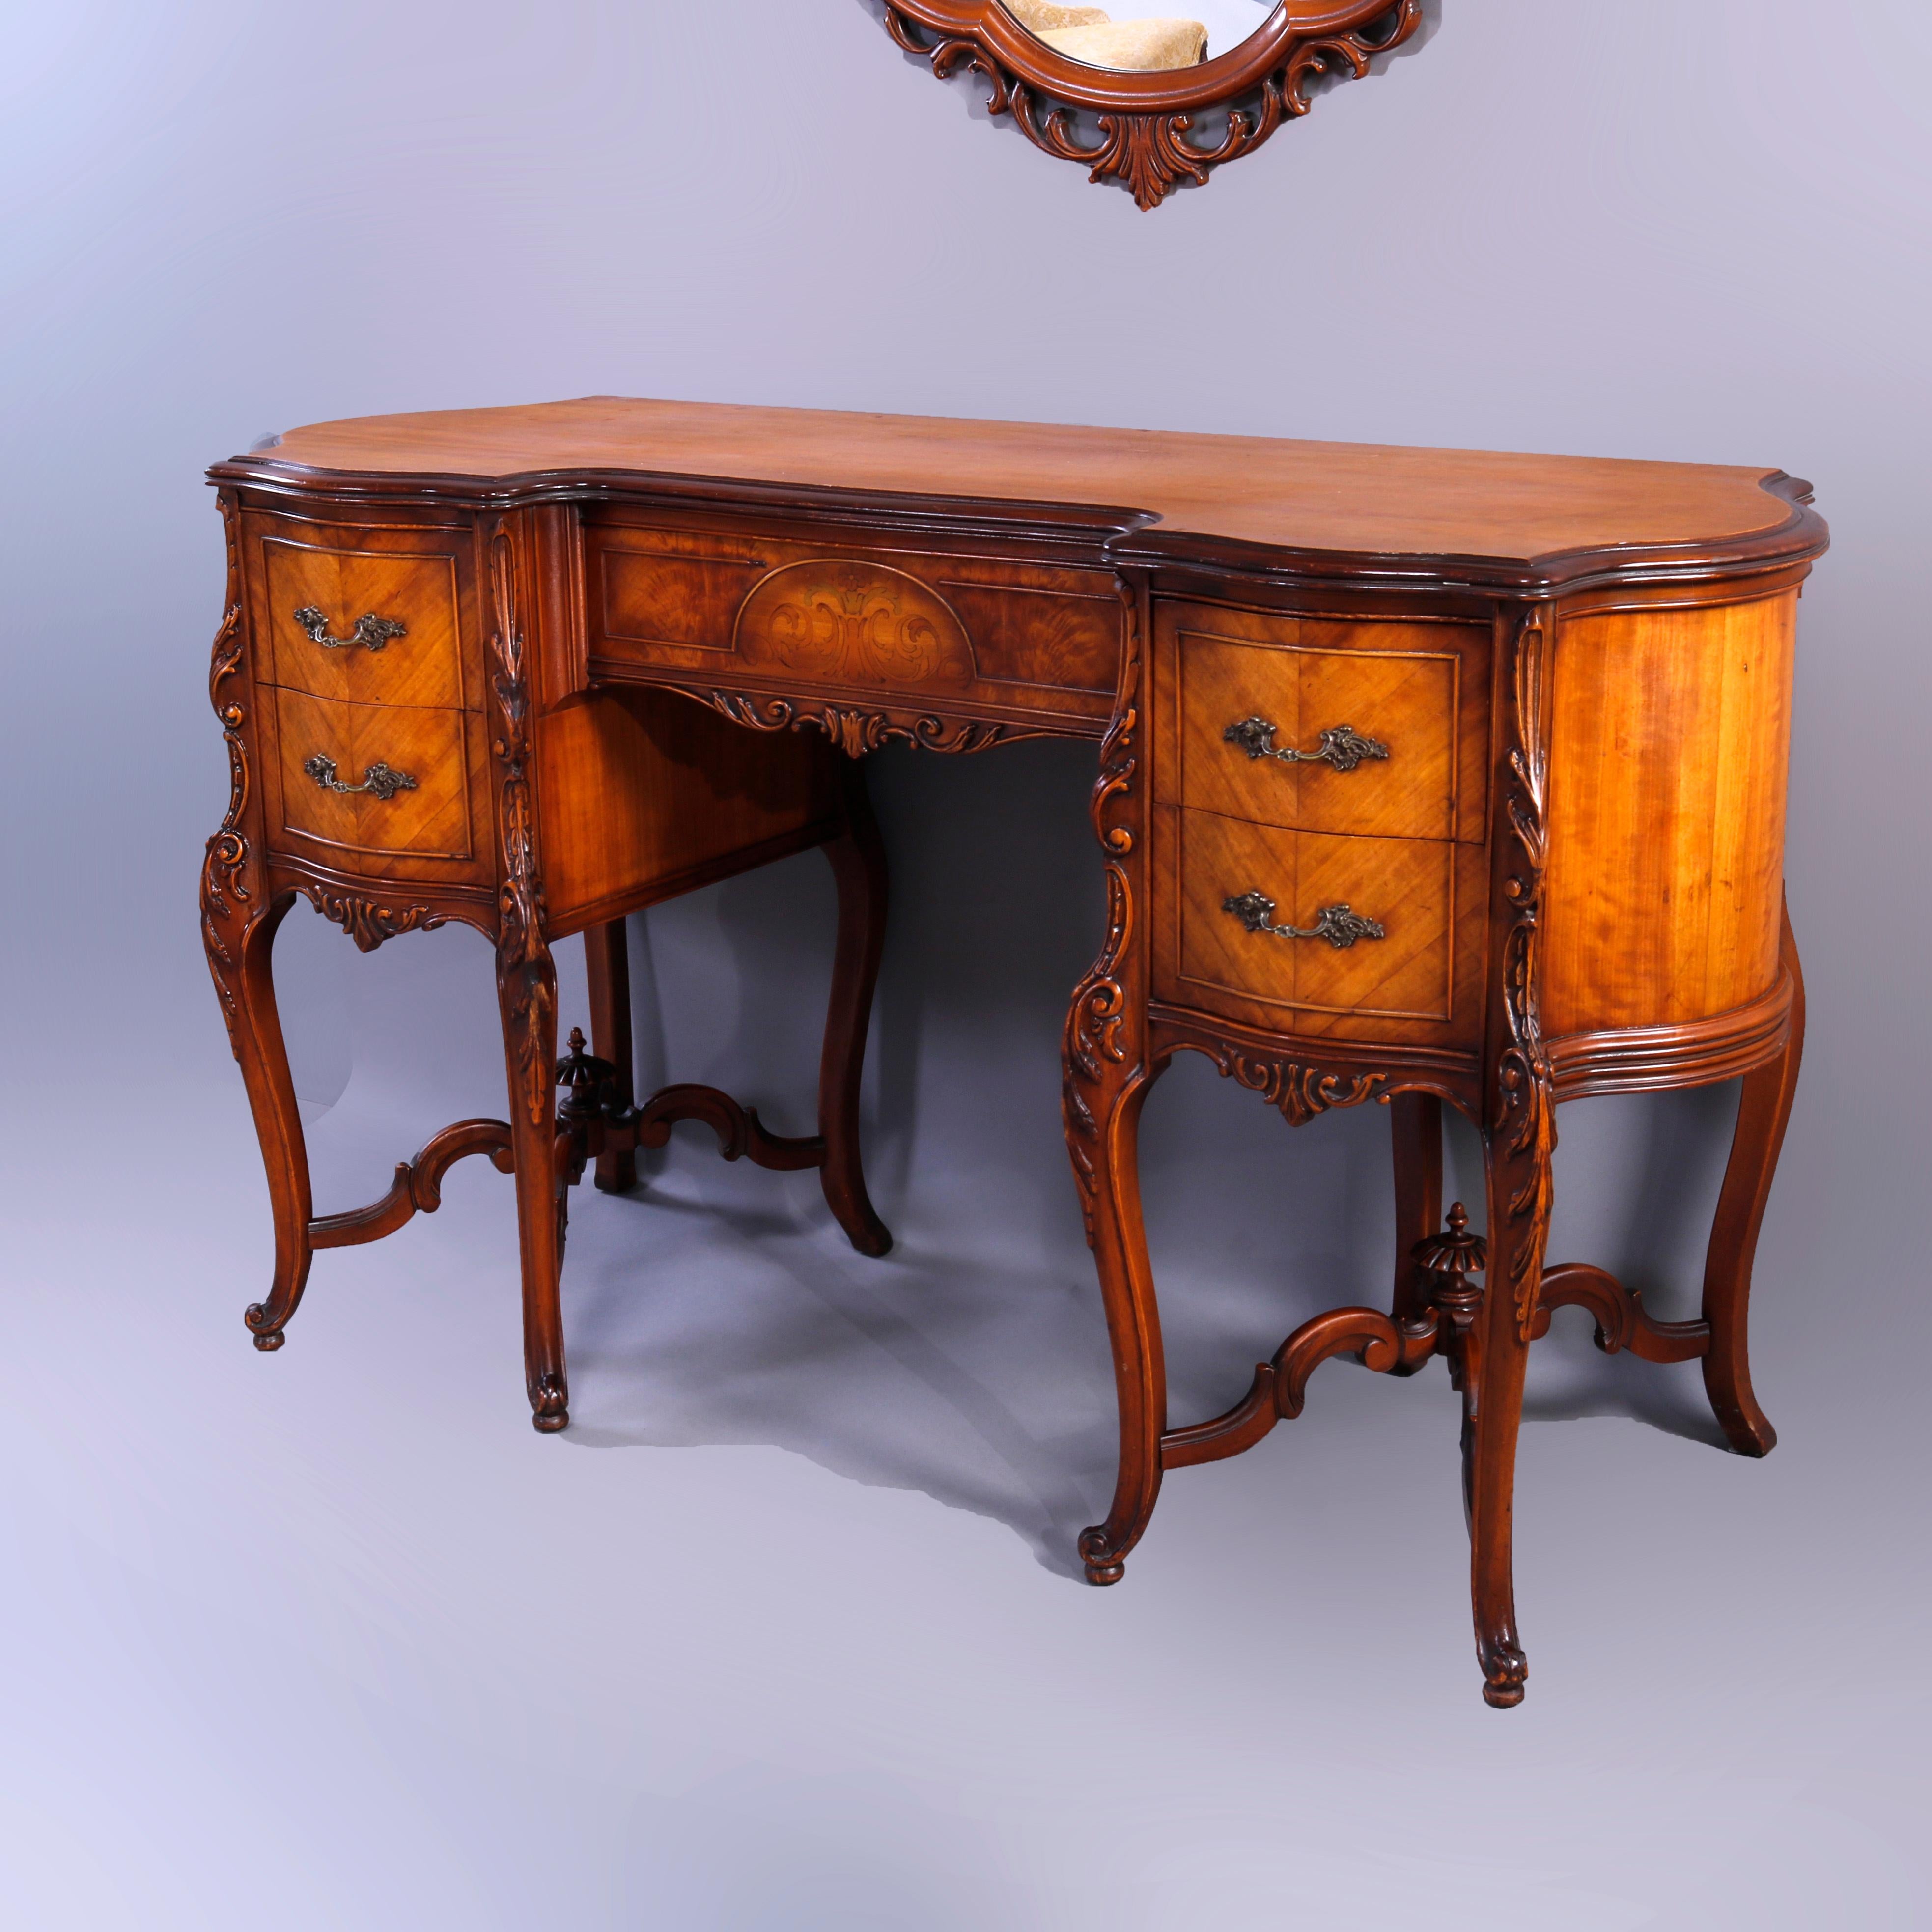 Mirror Antique French Flame Mahogany & Satinwood Marquetry Dressing Table Set, c1910 For Sale